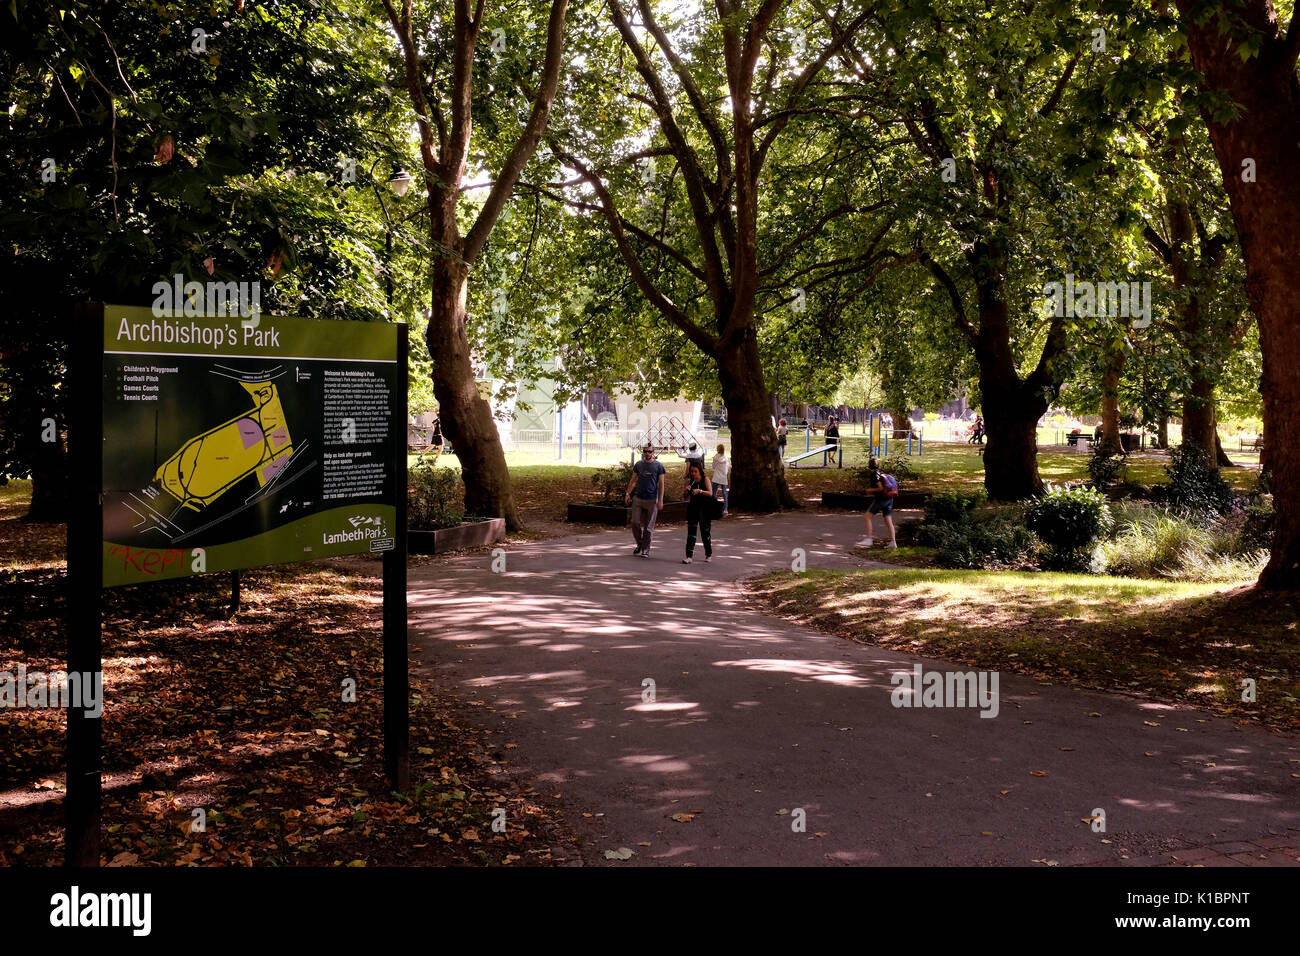 archbishops park in lambeth palace road london uk august 2017 Stock Photo